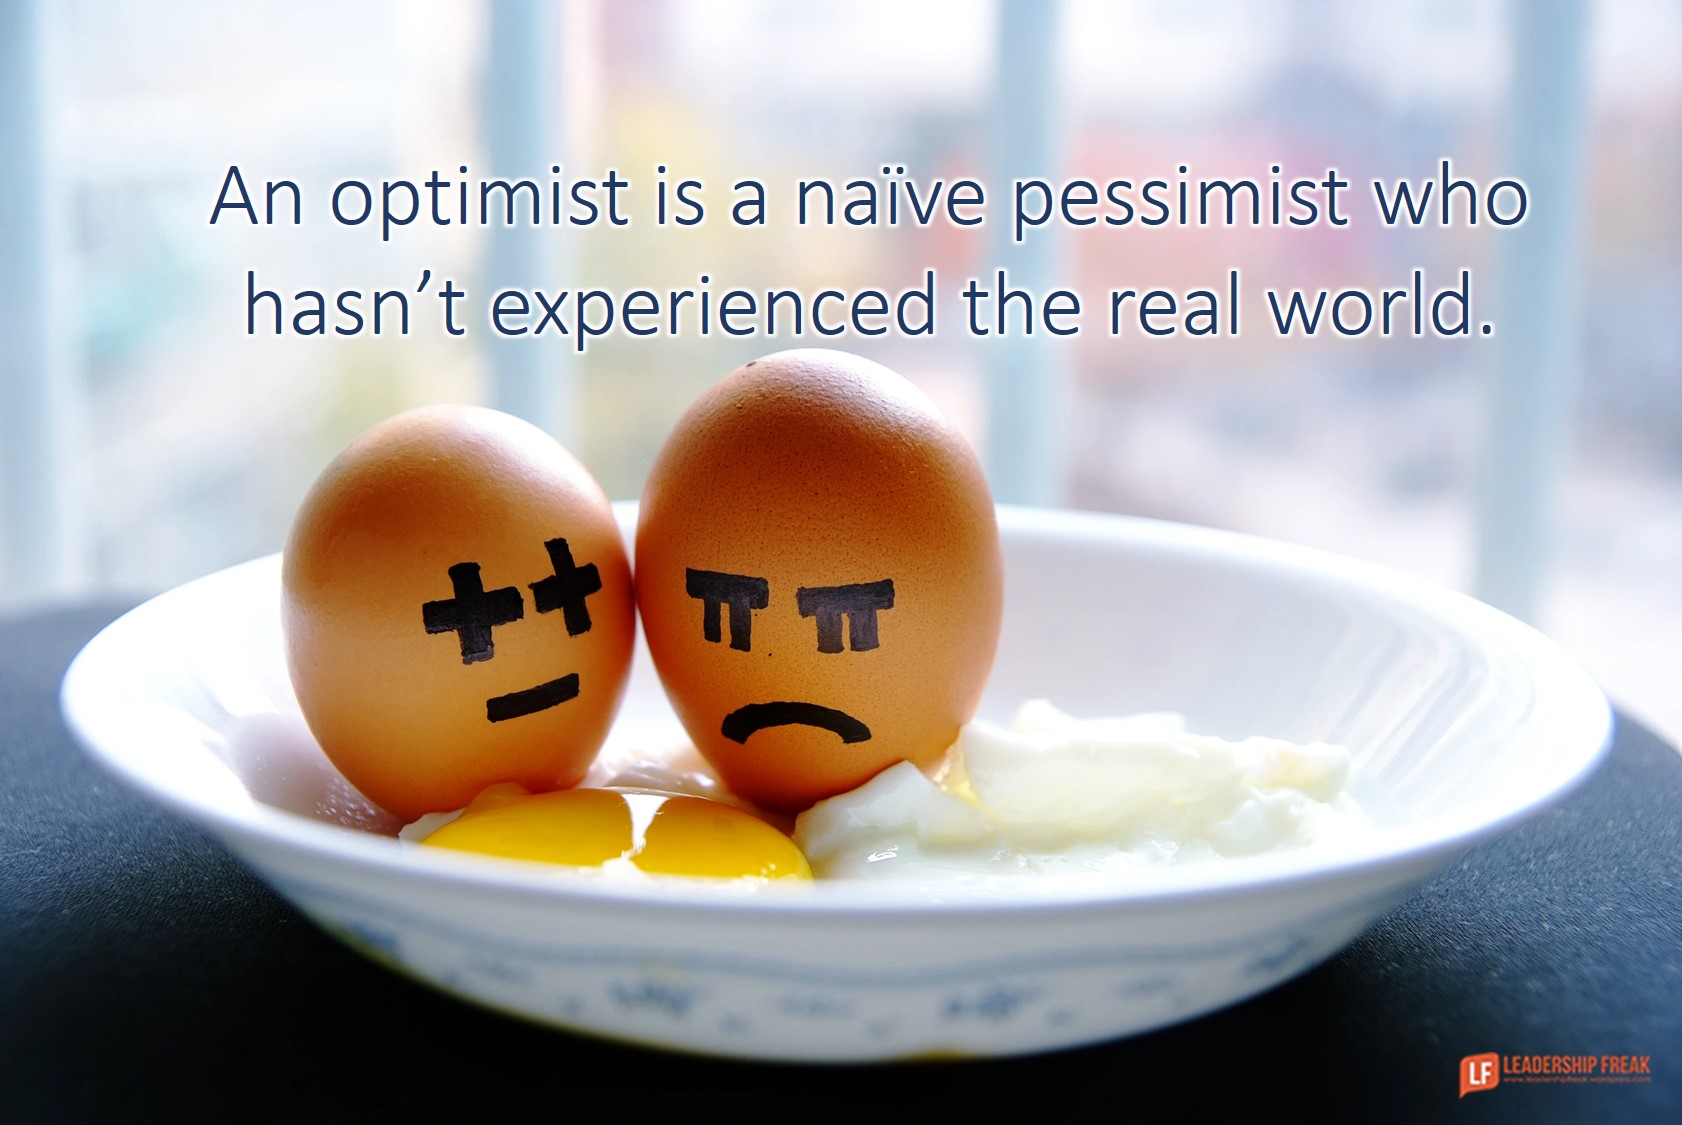 an-optimist-is-a-naive-pessemist-who-hasnt-experienced-the-real-world.jpg